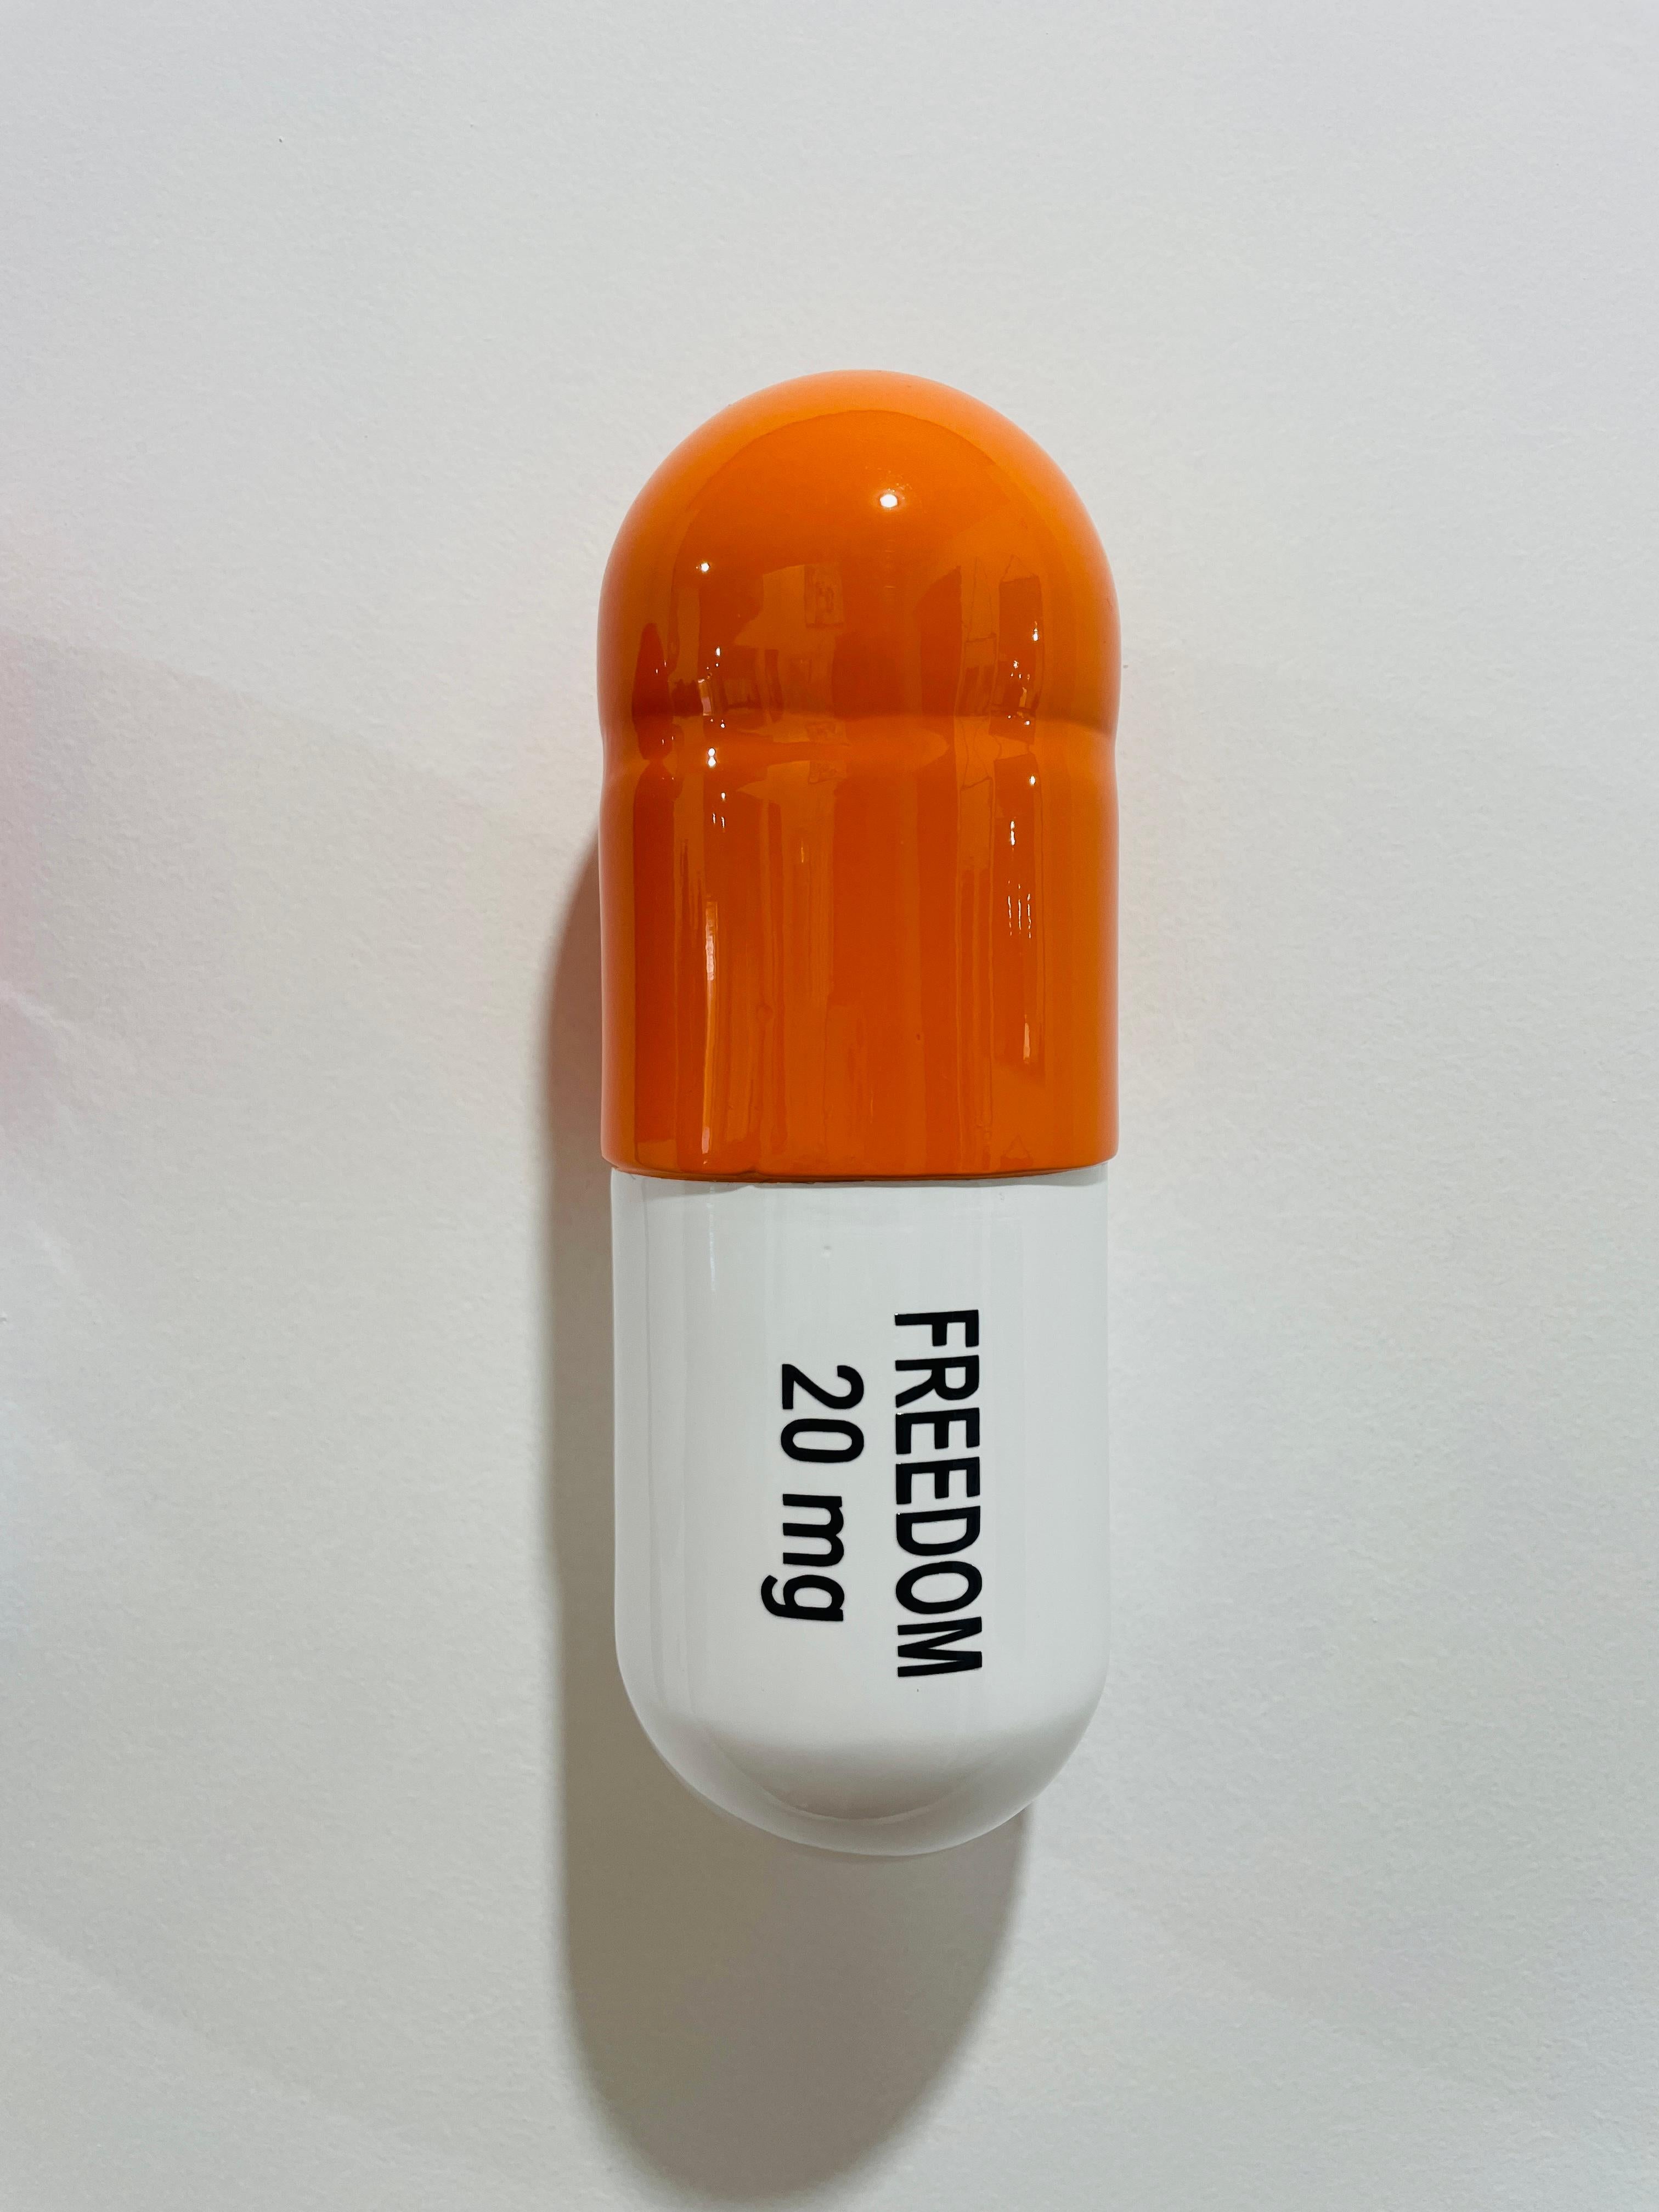 20 MG Hope Freedom pill Combo (red, orange, white) - figurative sculpture - Pop Art Sculpture by Tal Nehoray